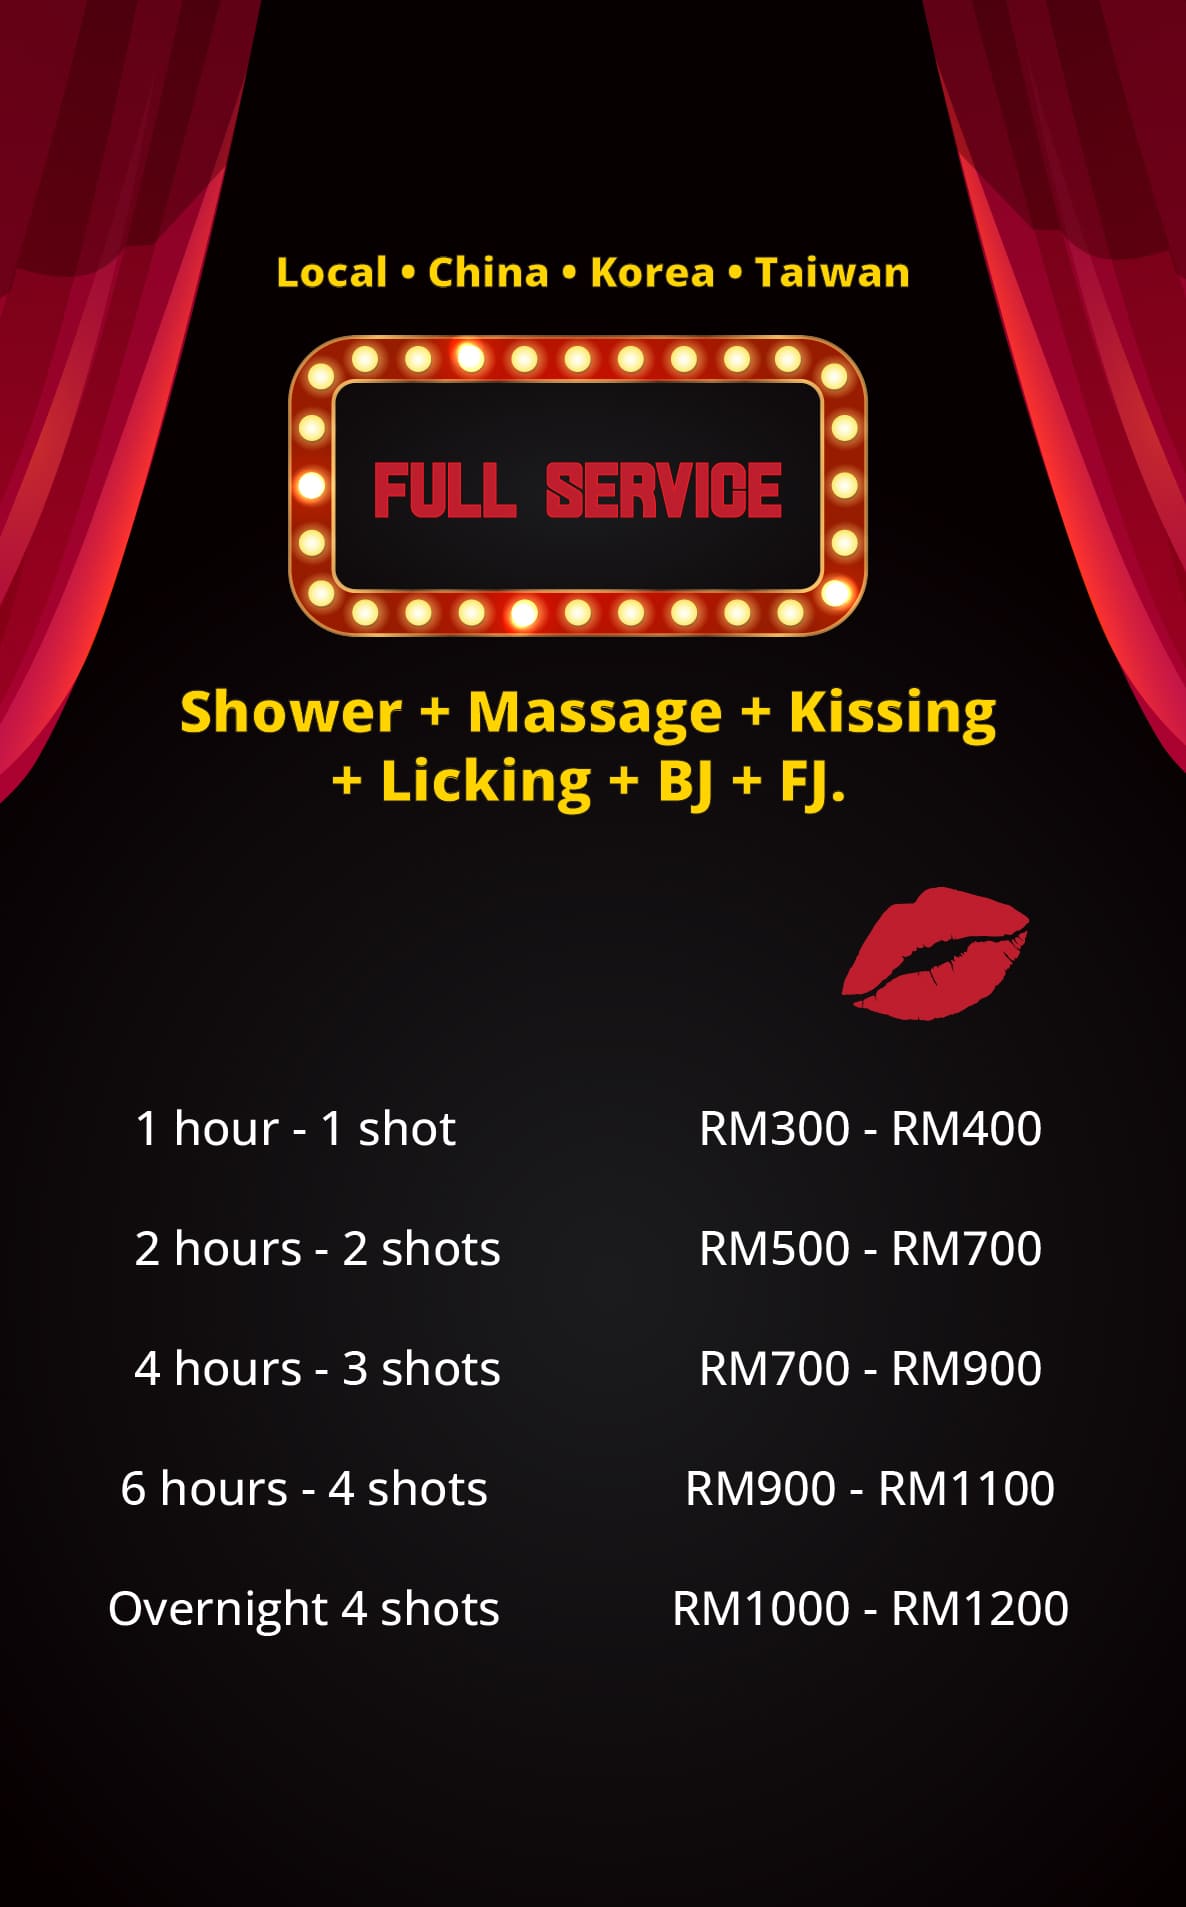 KissB2B Price list of Local, China, Korea and Taiwan. Full service is 1 hour around RM400